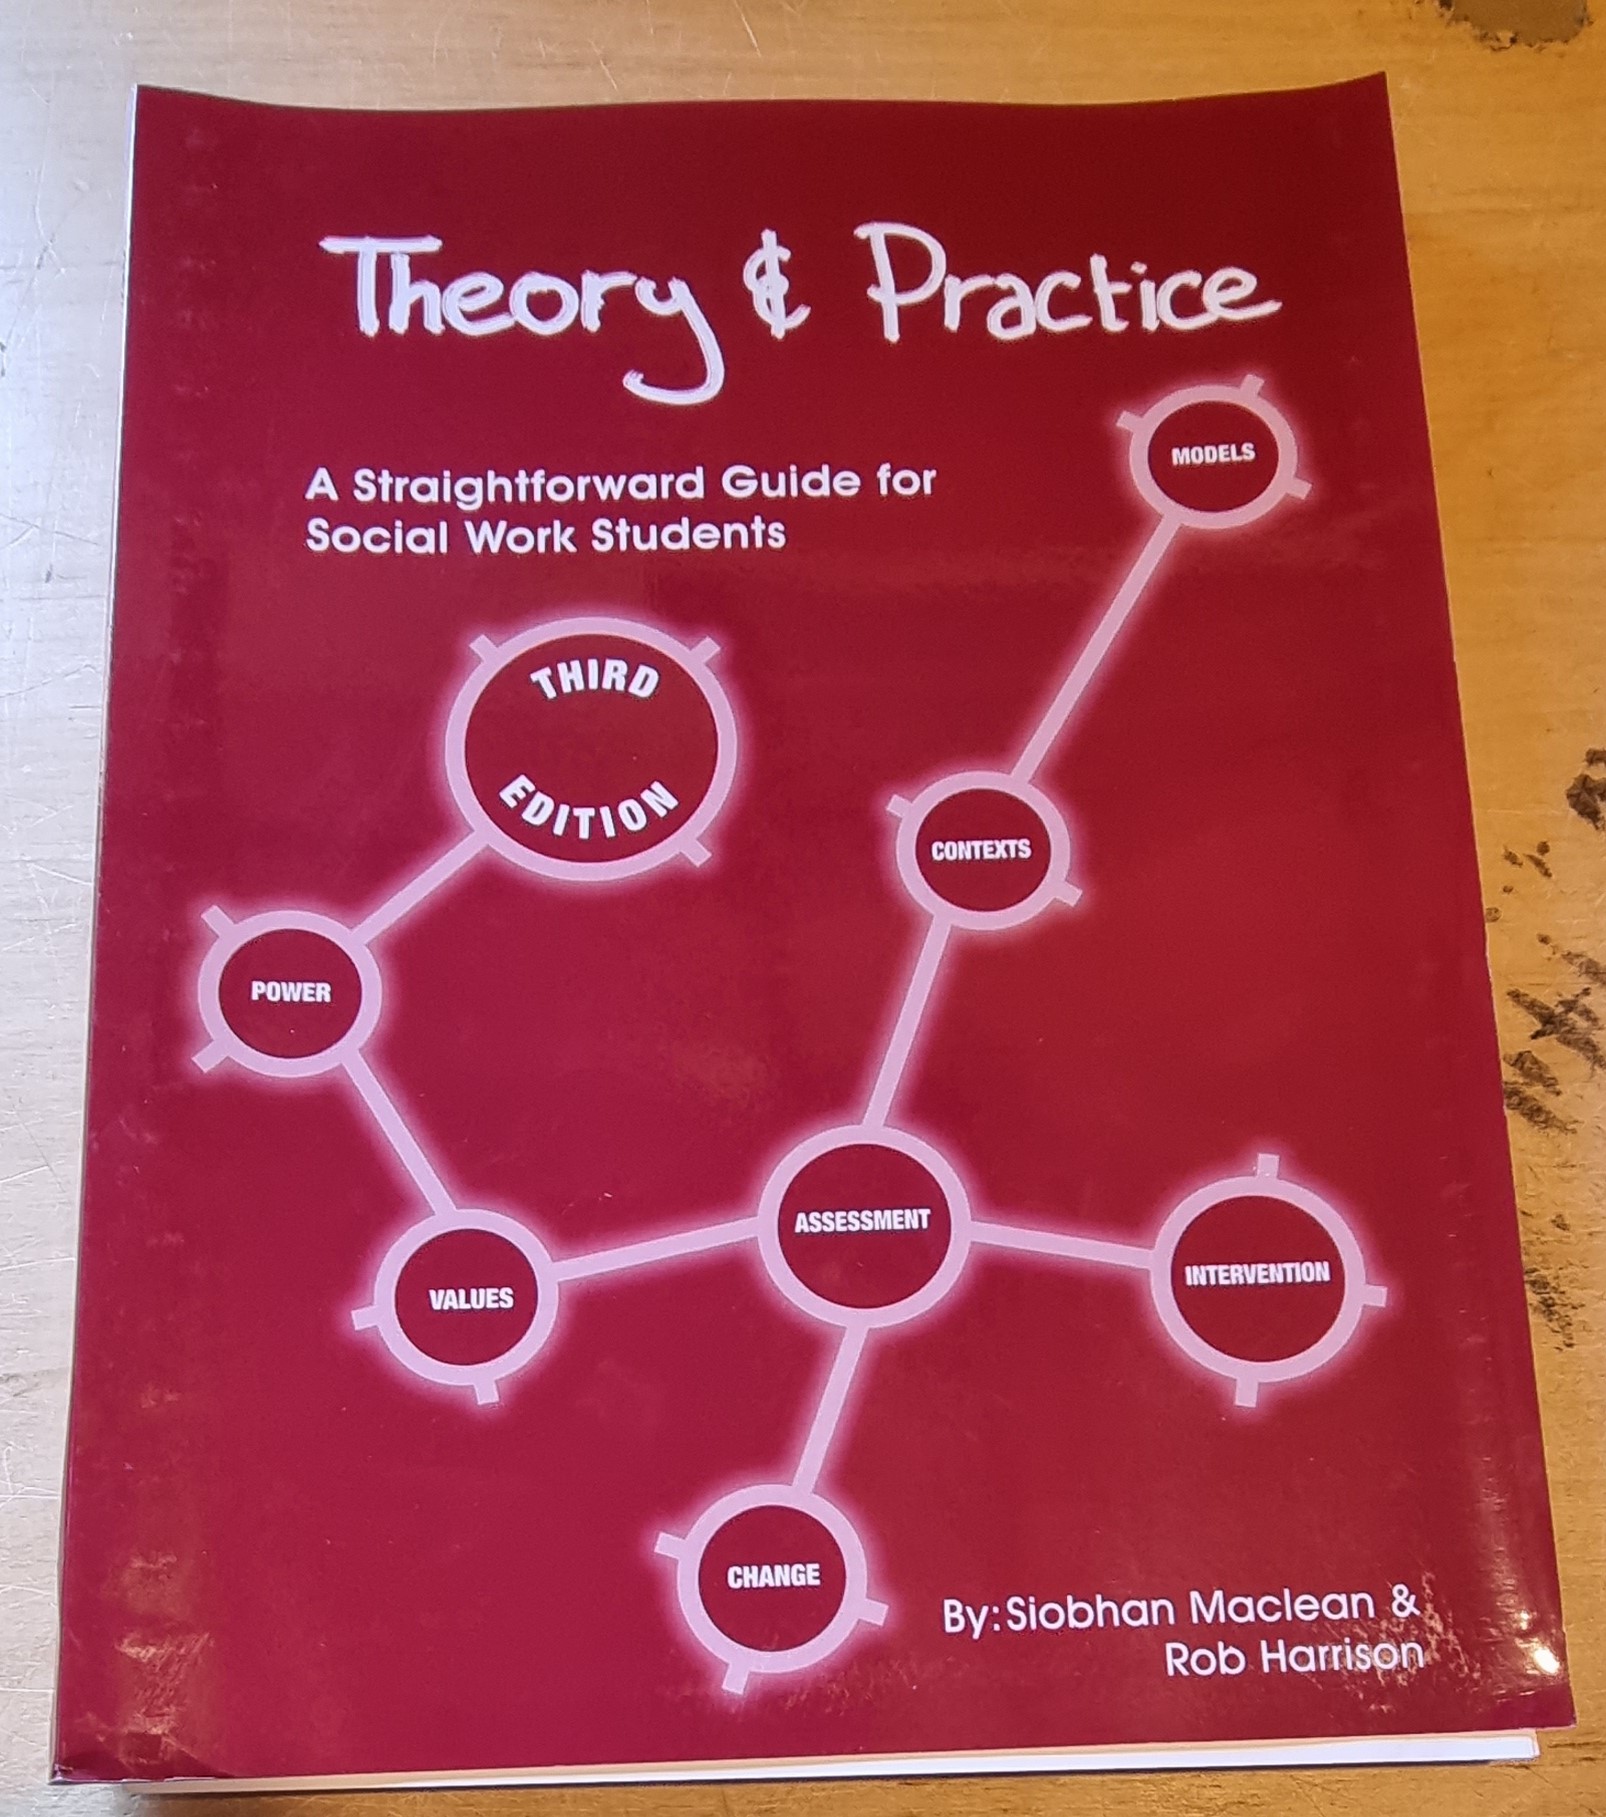 Theory and Practice: A Straightforward Guide for Social Work Students- dented corners - special offer £10.00